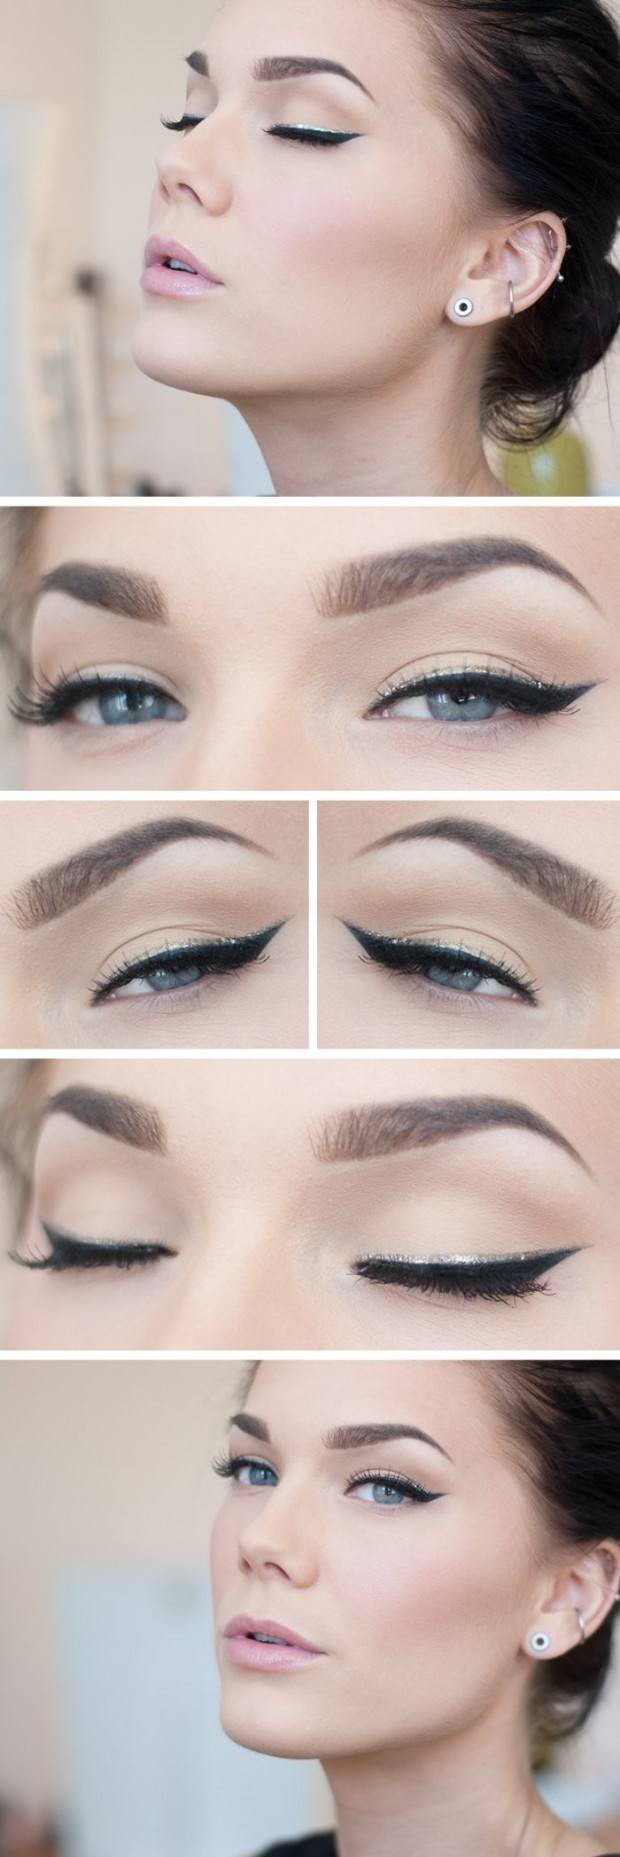 Party Eye Makeup Pictures Pakistani 15 Easy And Stylish Eye Makeup Tutorials How To Wear Eye Makeup